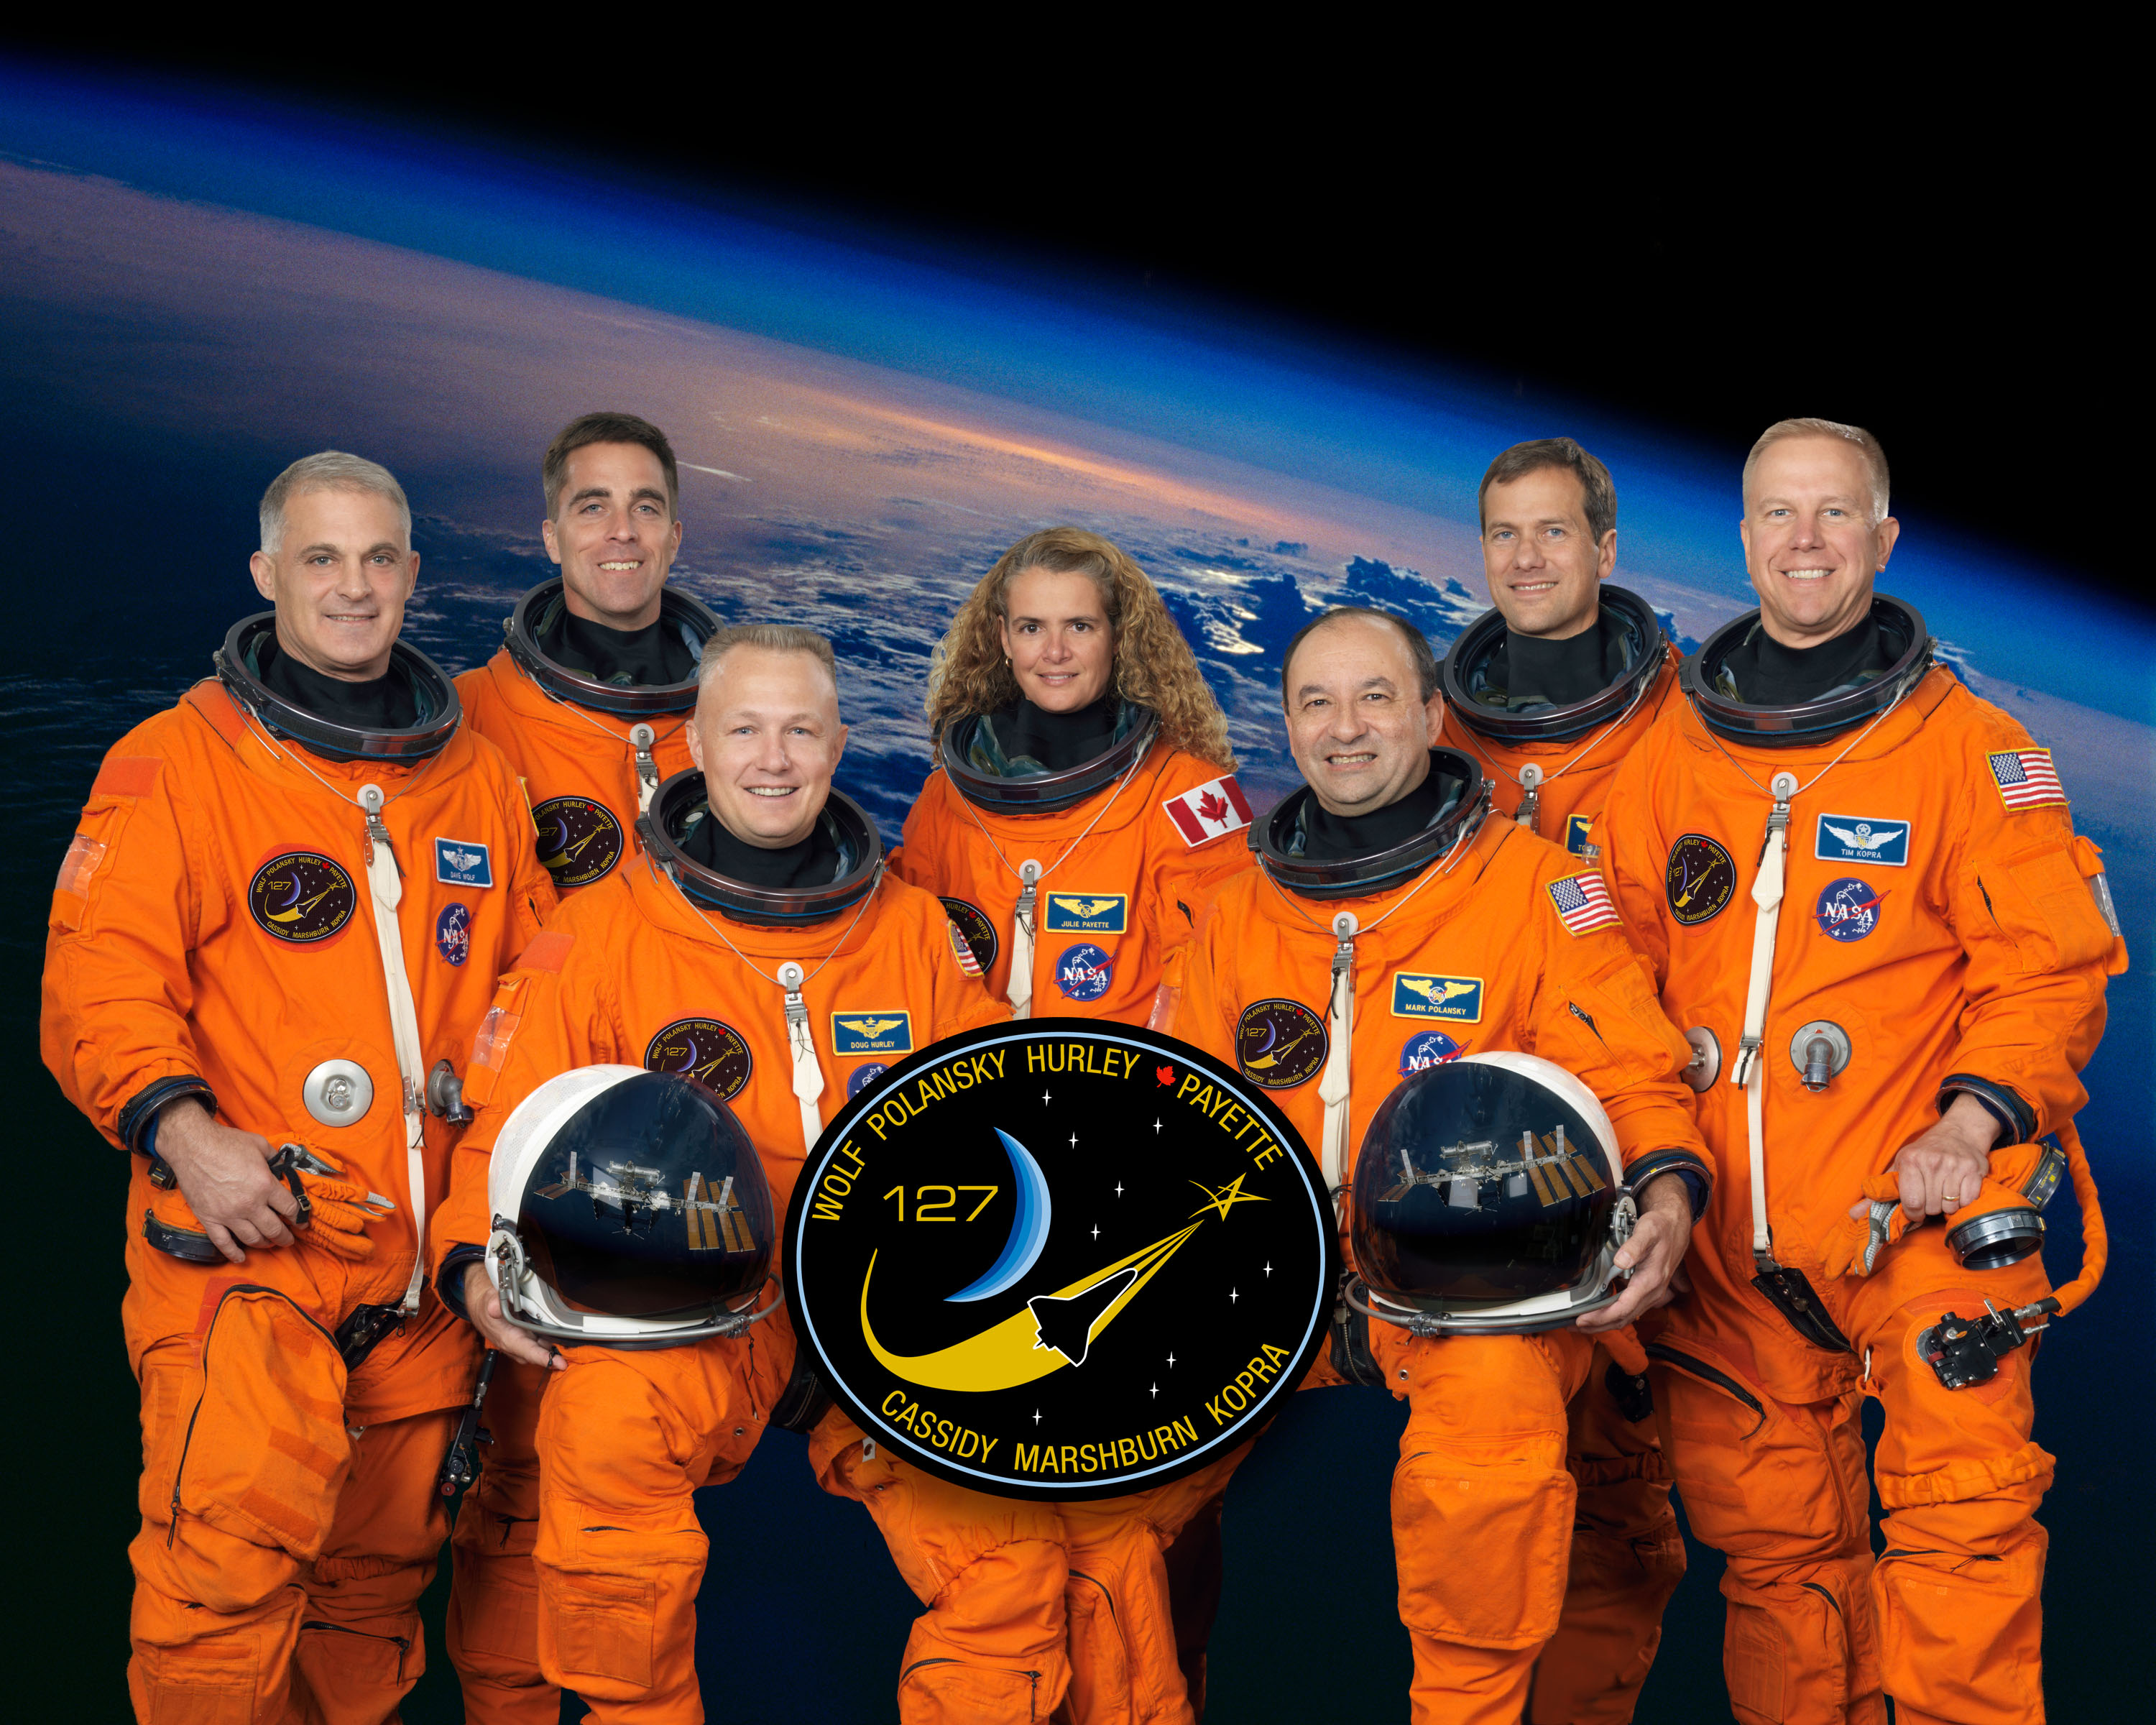 Official photograph of the STS-127 crew of David A. Wolf, left, Christopher J. Cassidy, Douglas G. Hurley, Julie Payette of Canada, Mark L. Polansky, Thomas H. Marshburn, and Timothy L. Kopra